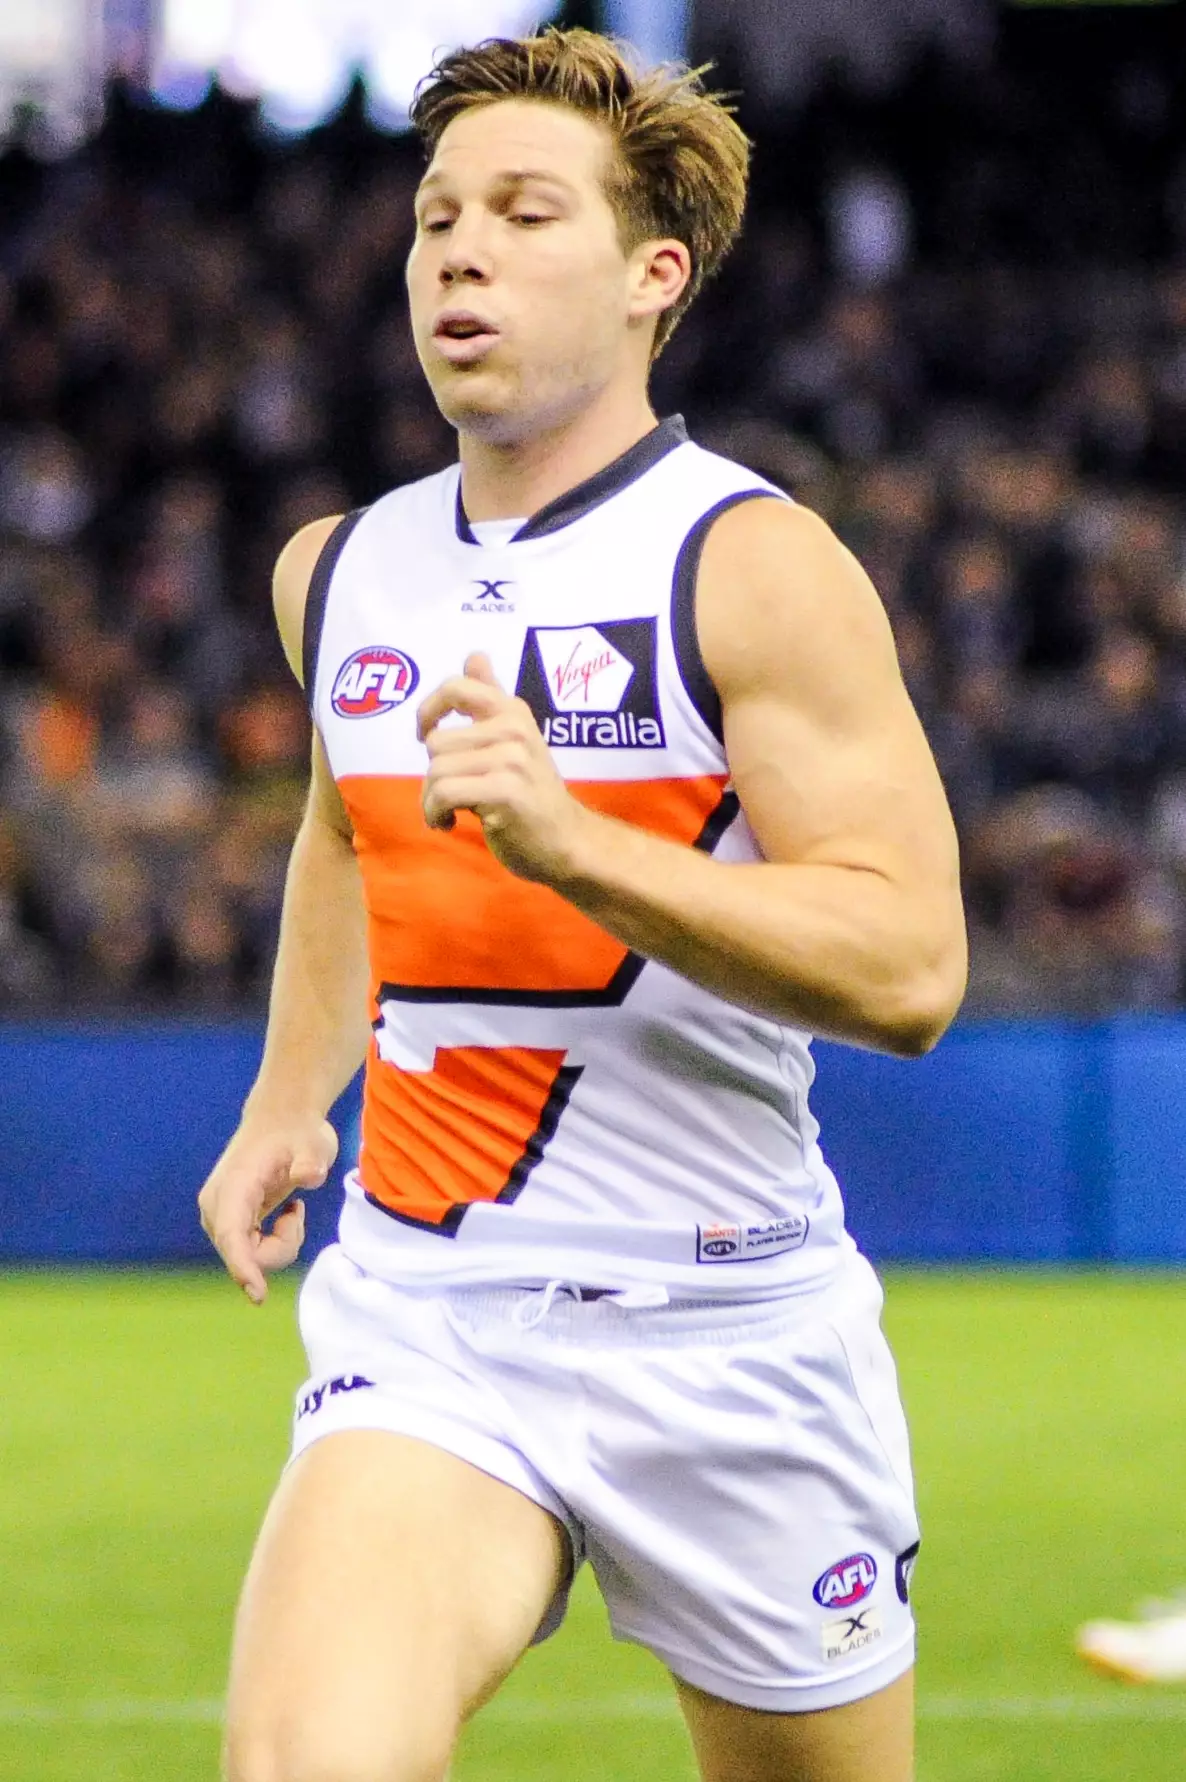 The Giants will be without star man Toby Greene.